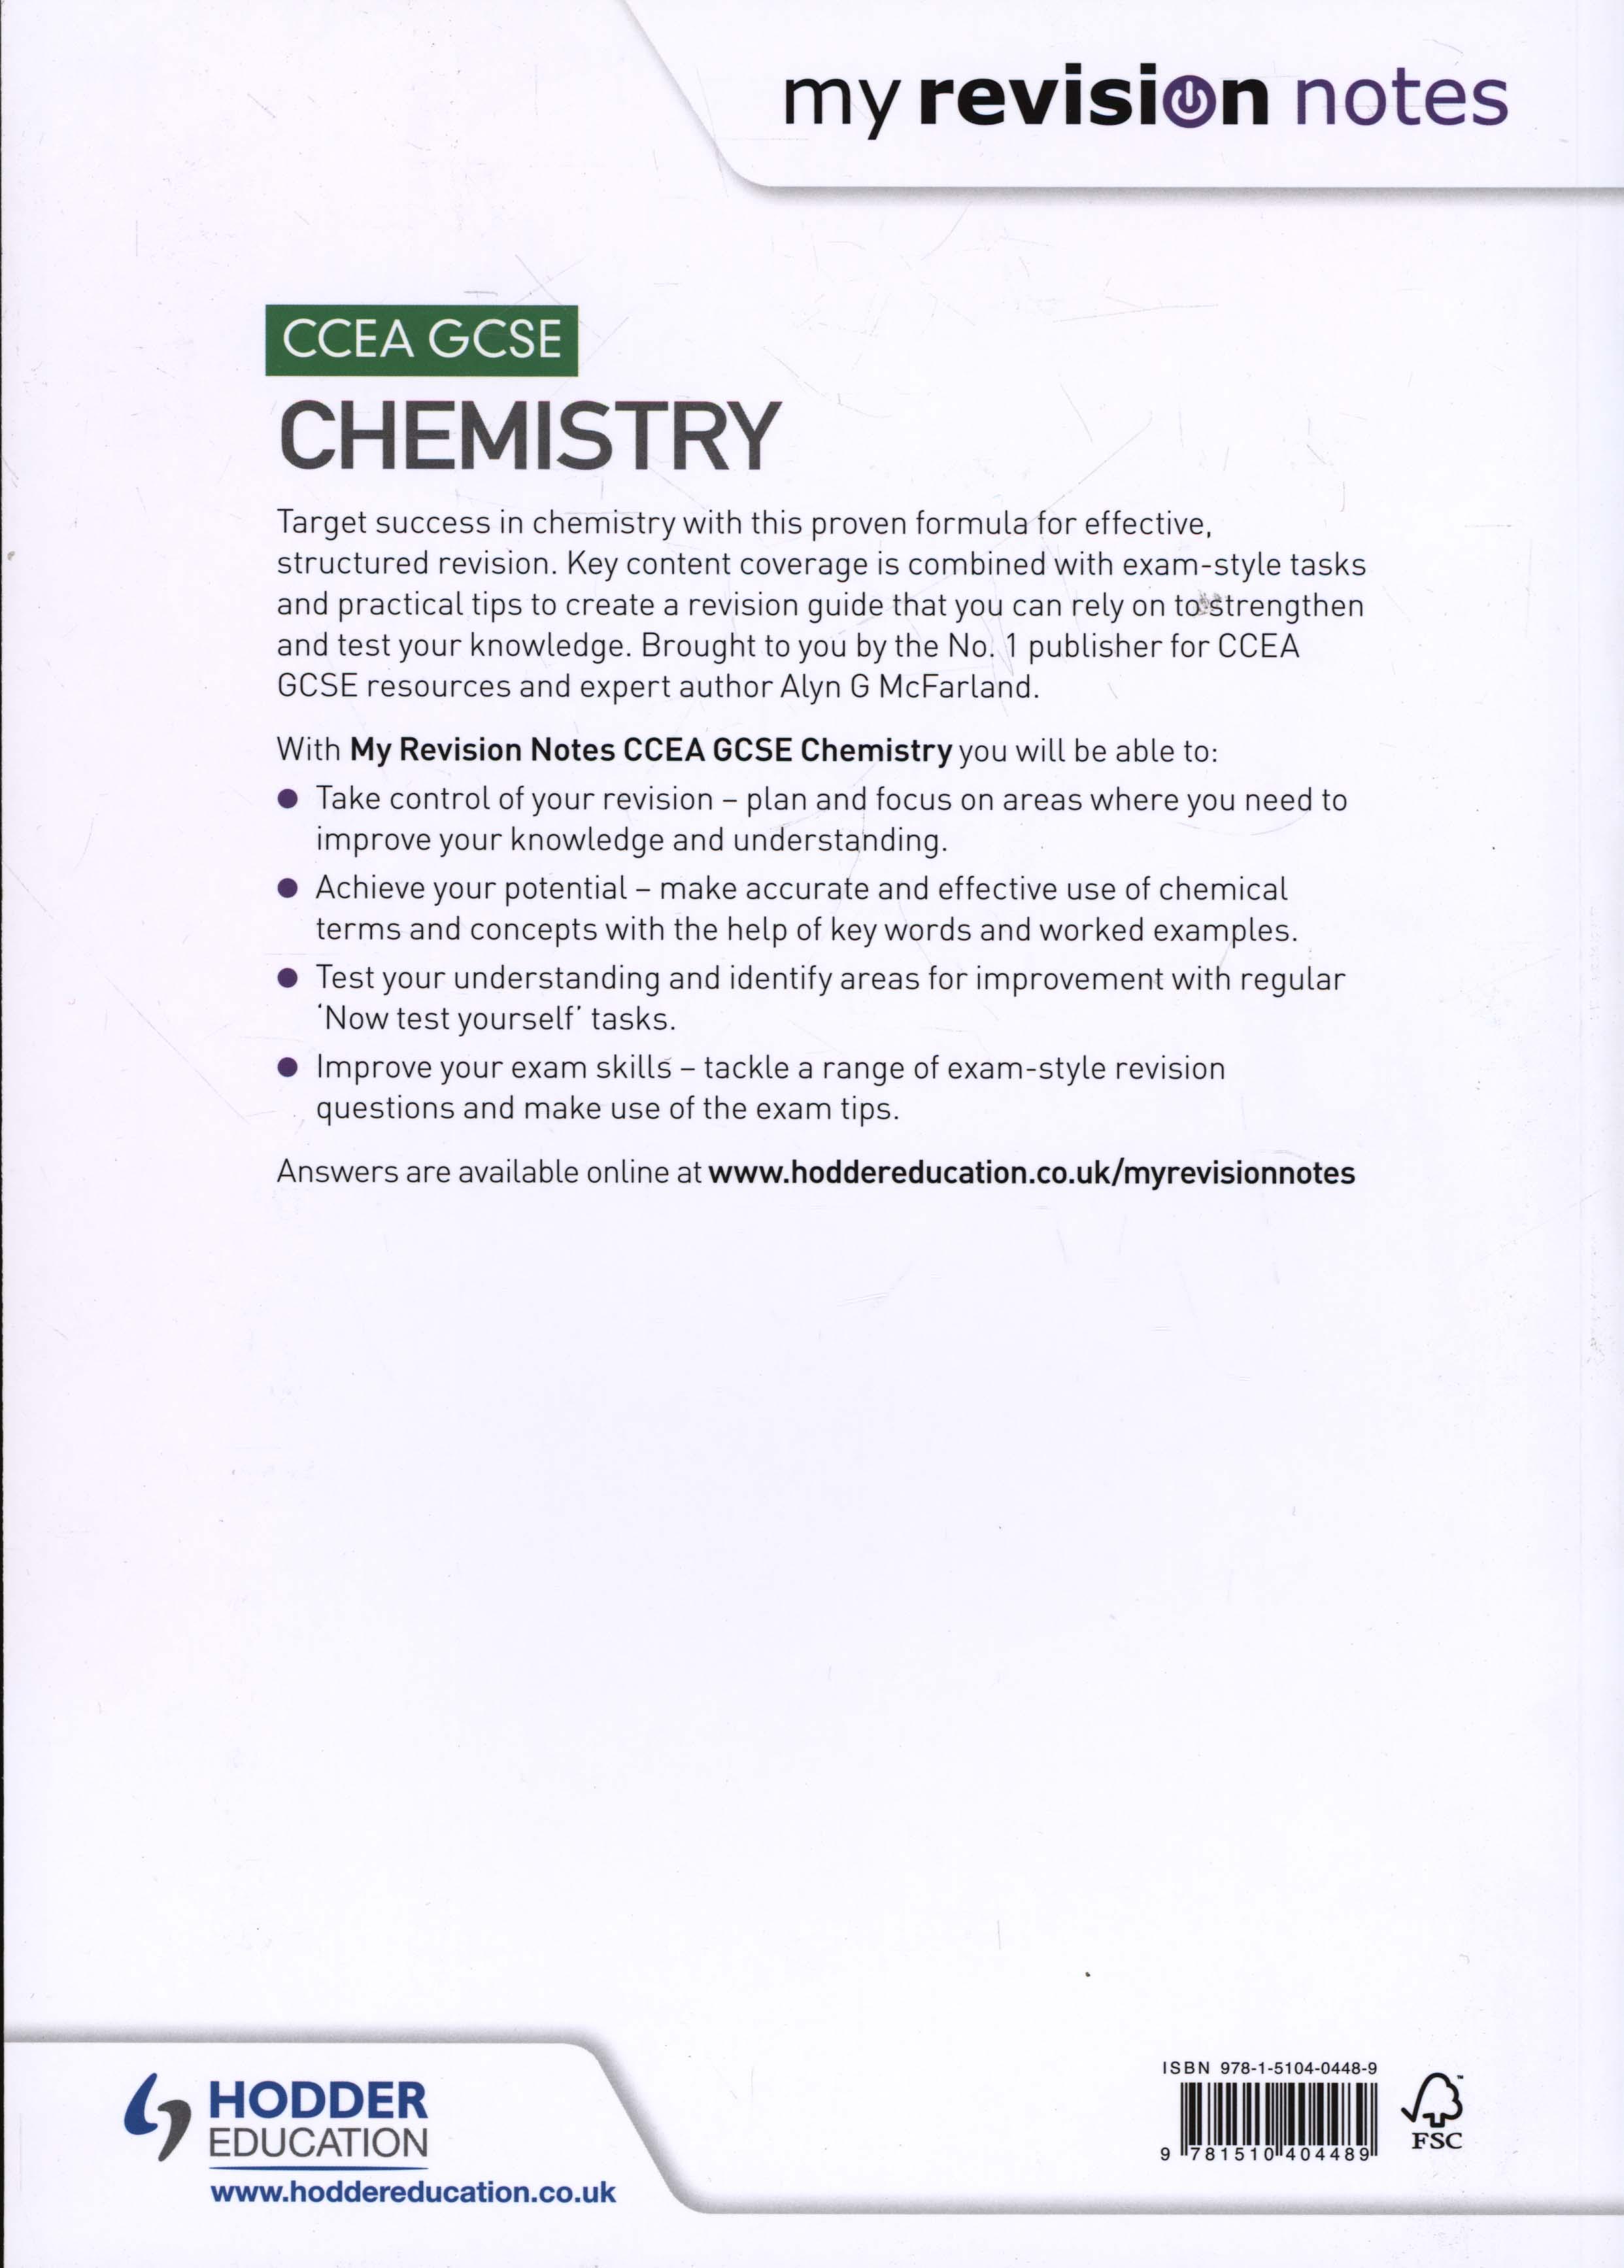 My Revision Notes: CCEA GCSE Chemistry